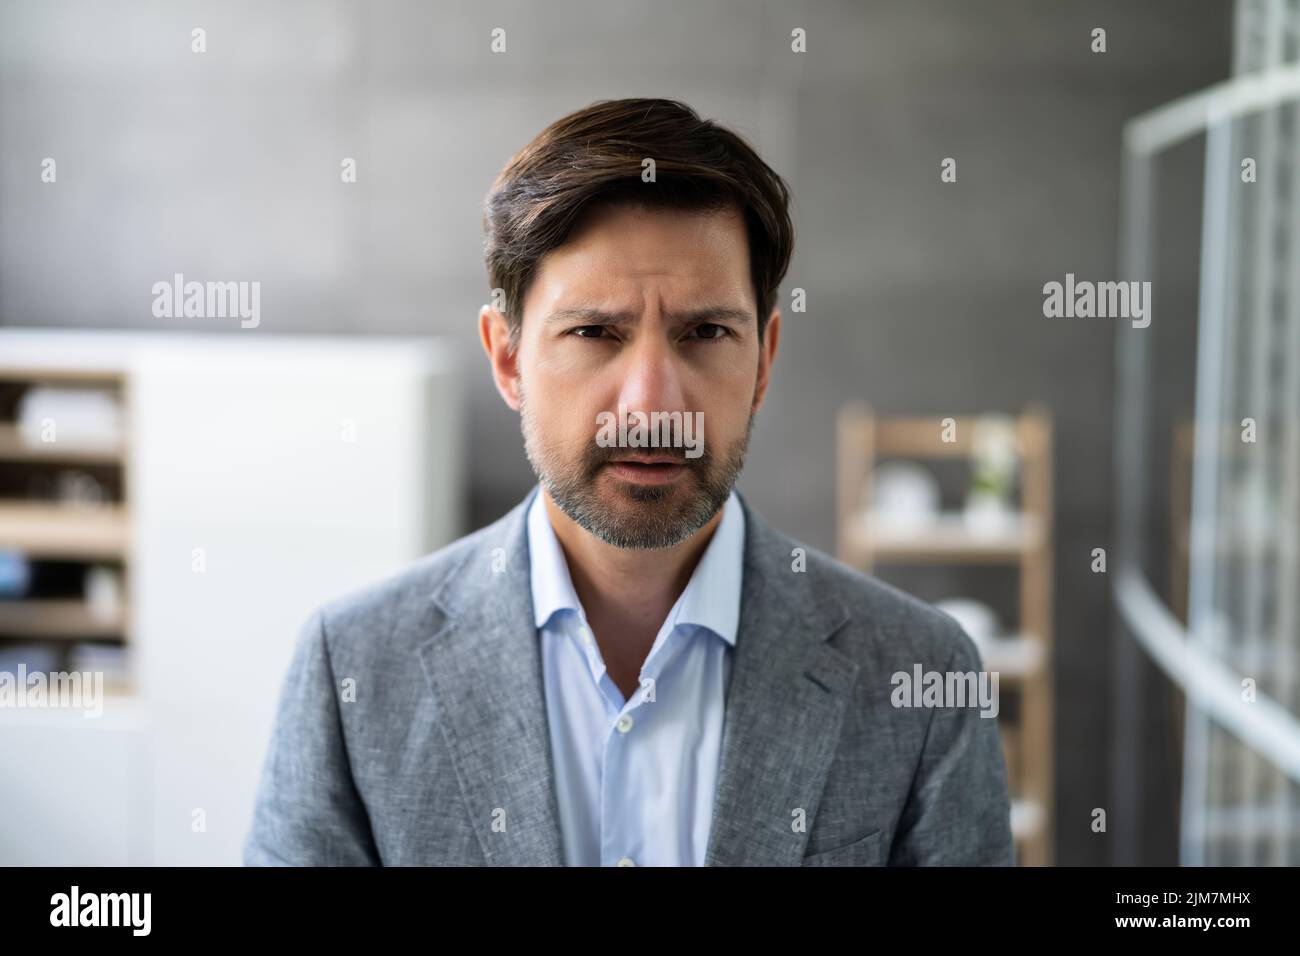 Workplace Quarrel. Angry Looking Man In Video Conference Stock Photo